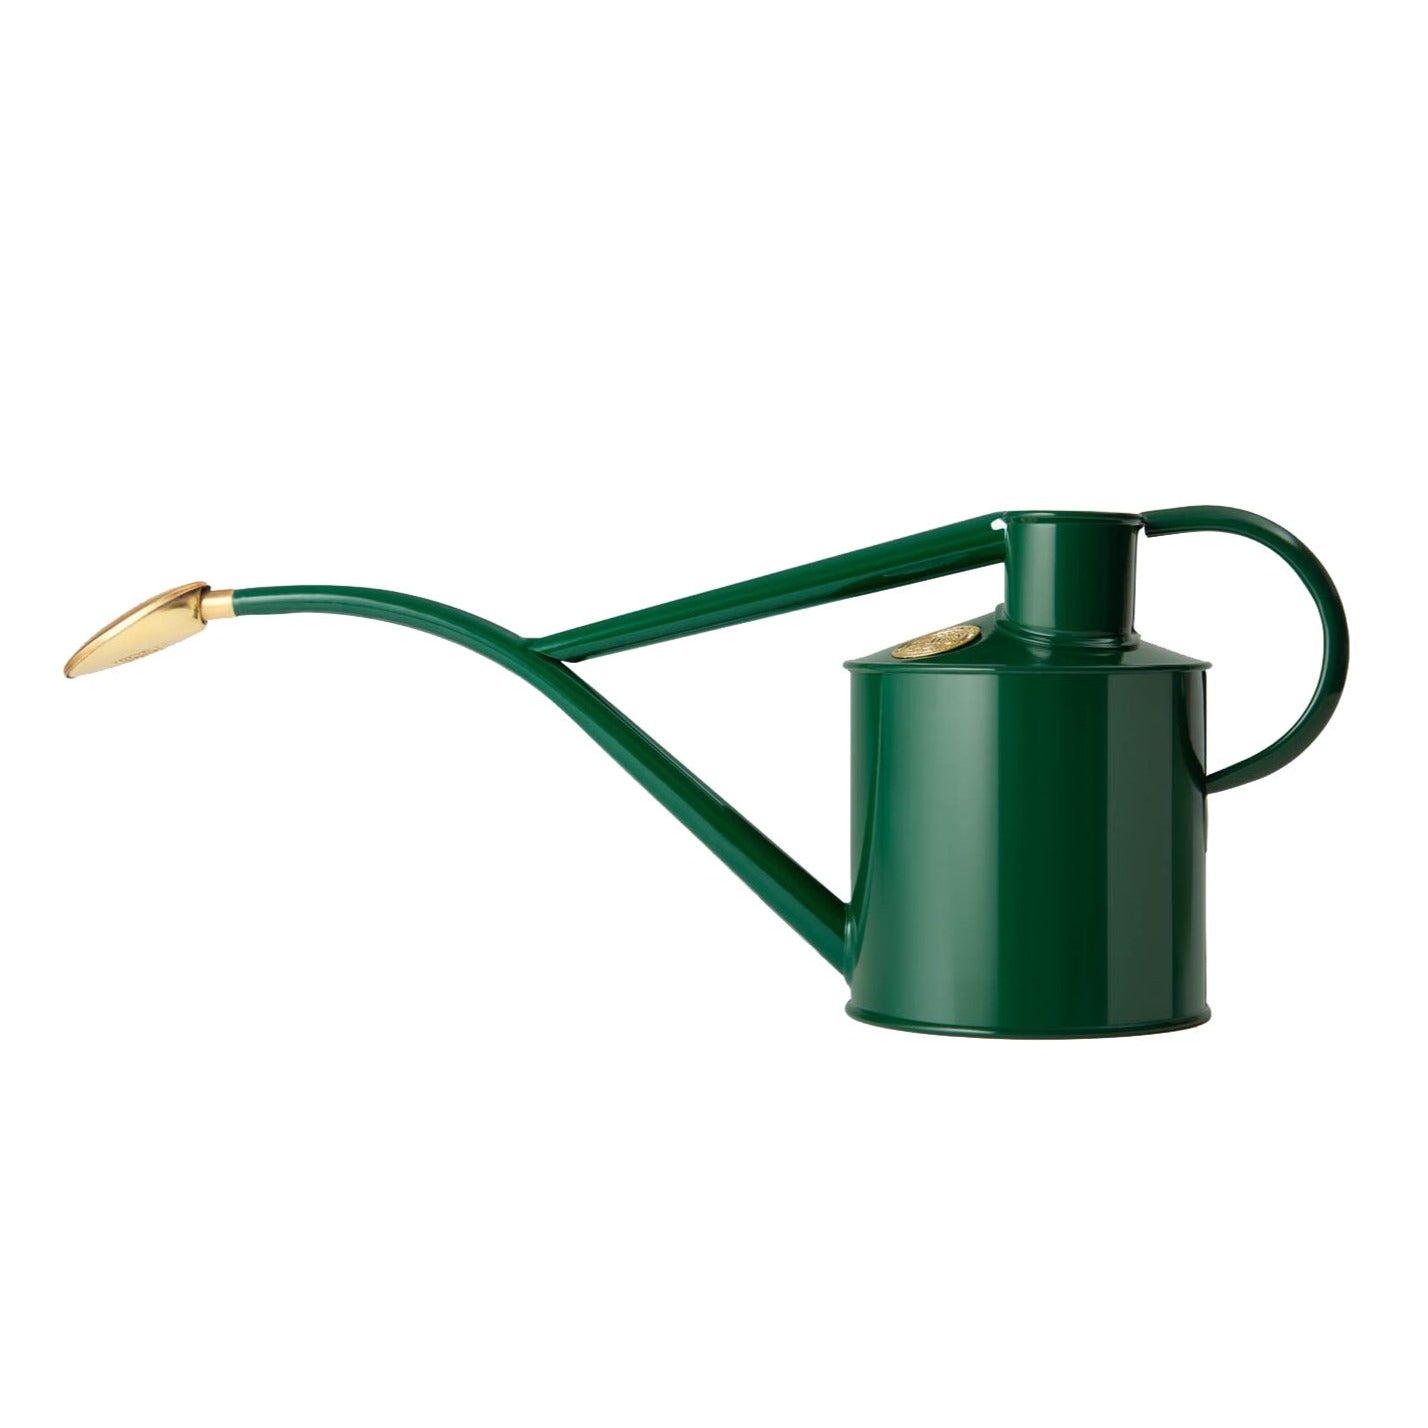 Haws 'Rowley Ripple' 1-litre indoor watering can in green. Introducing the ultimate multi-purpose metal watering can, an elegant and versatile companion to help you grow your own.